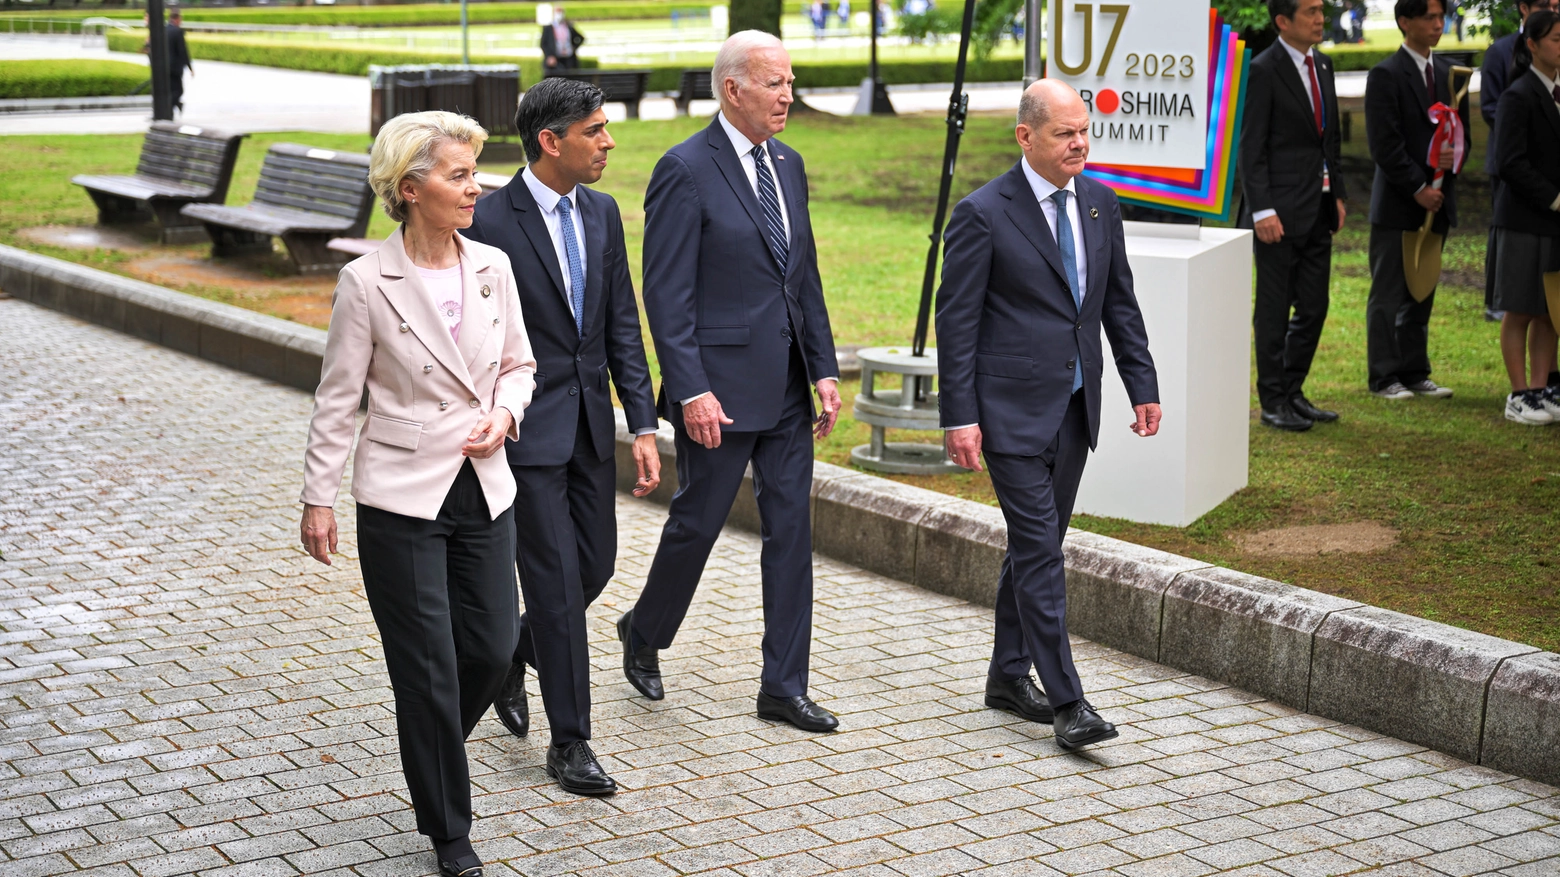 Il Summit G7 a Hiroshima, in Giappone